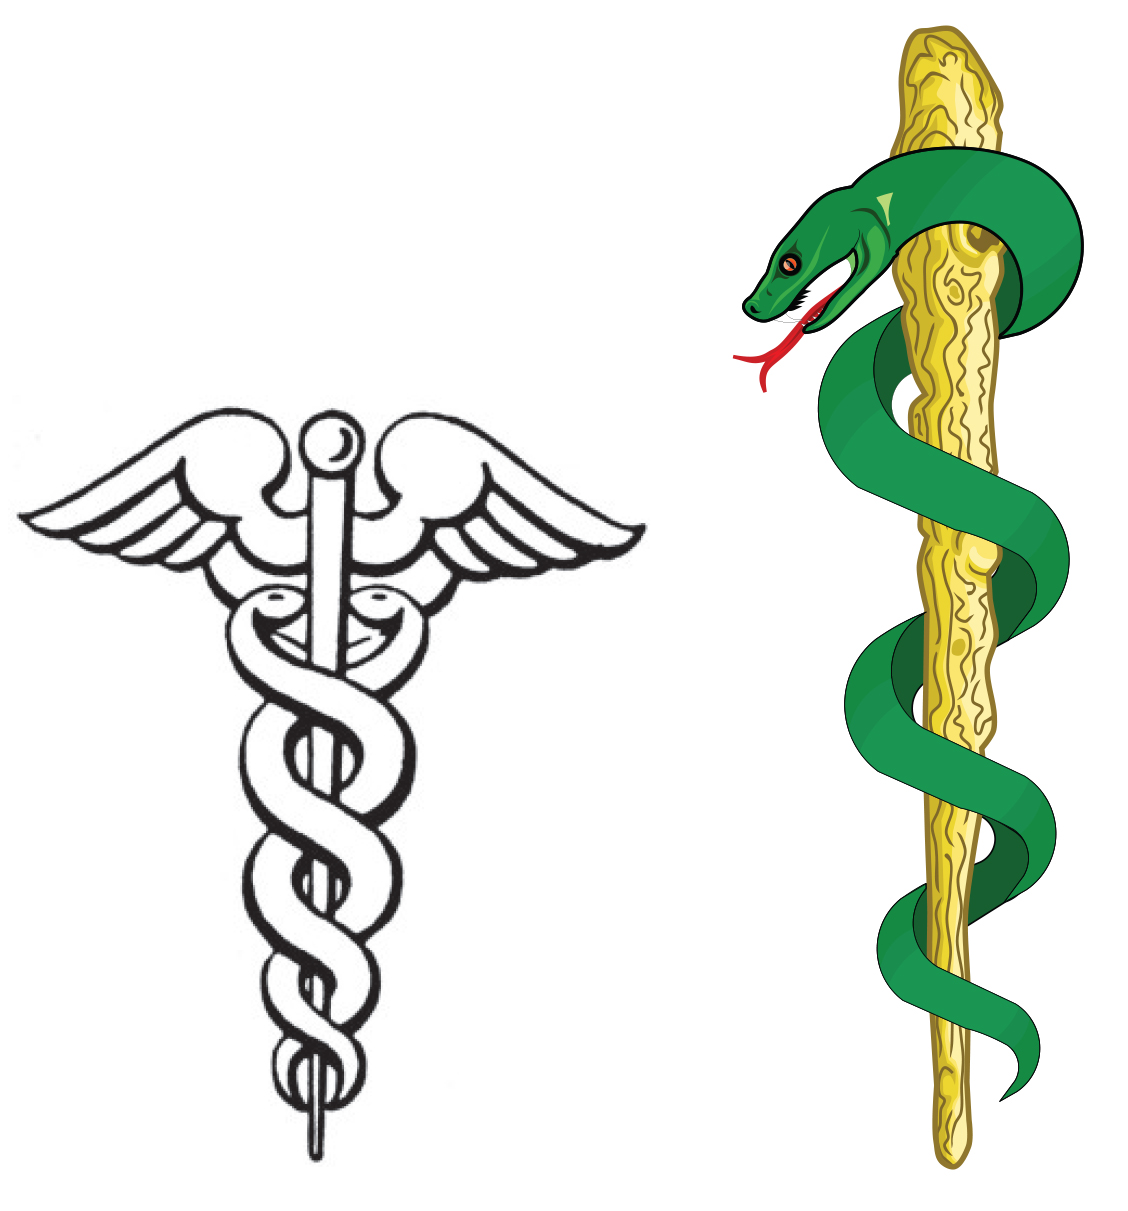 A rod of Asclepius and a wand of Hermes (caduceus)